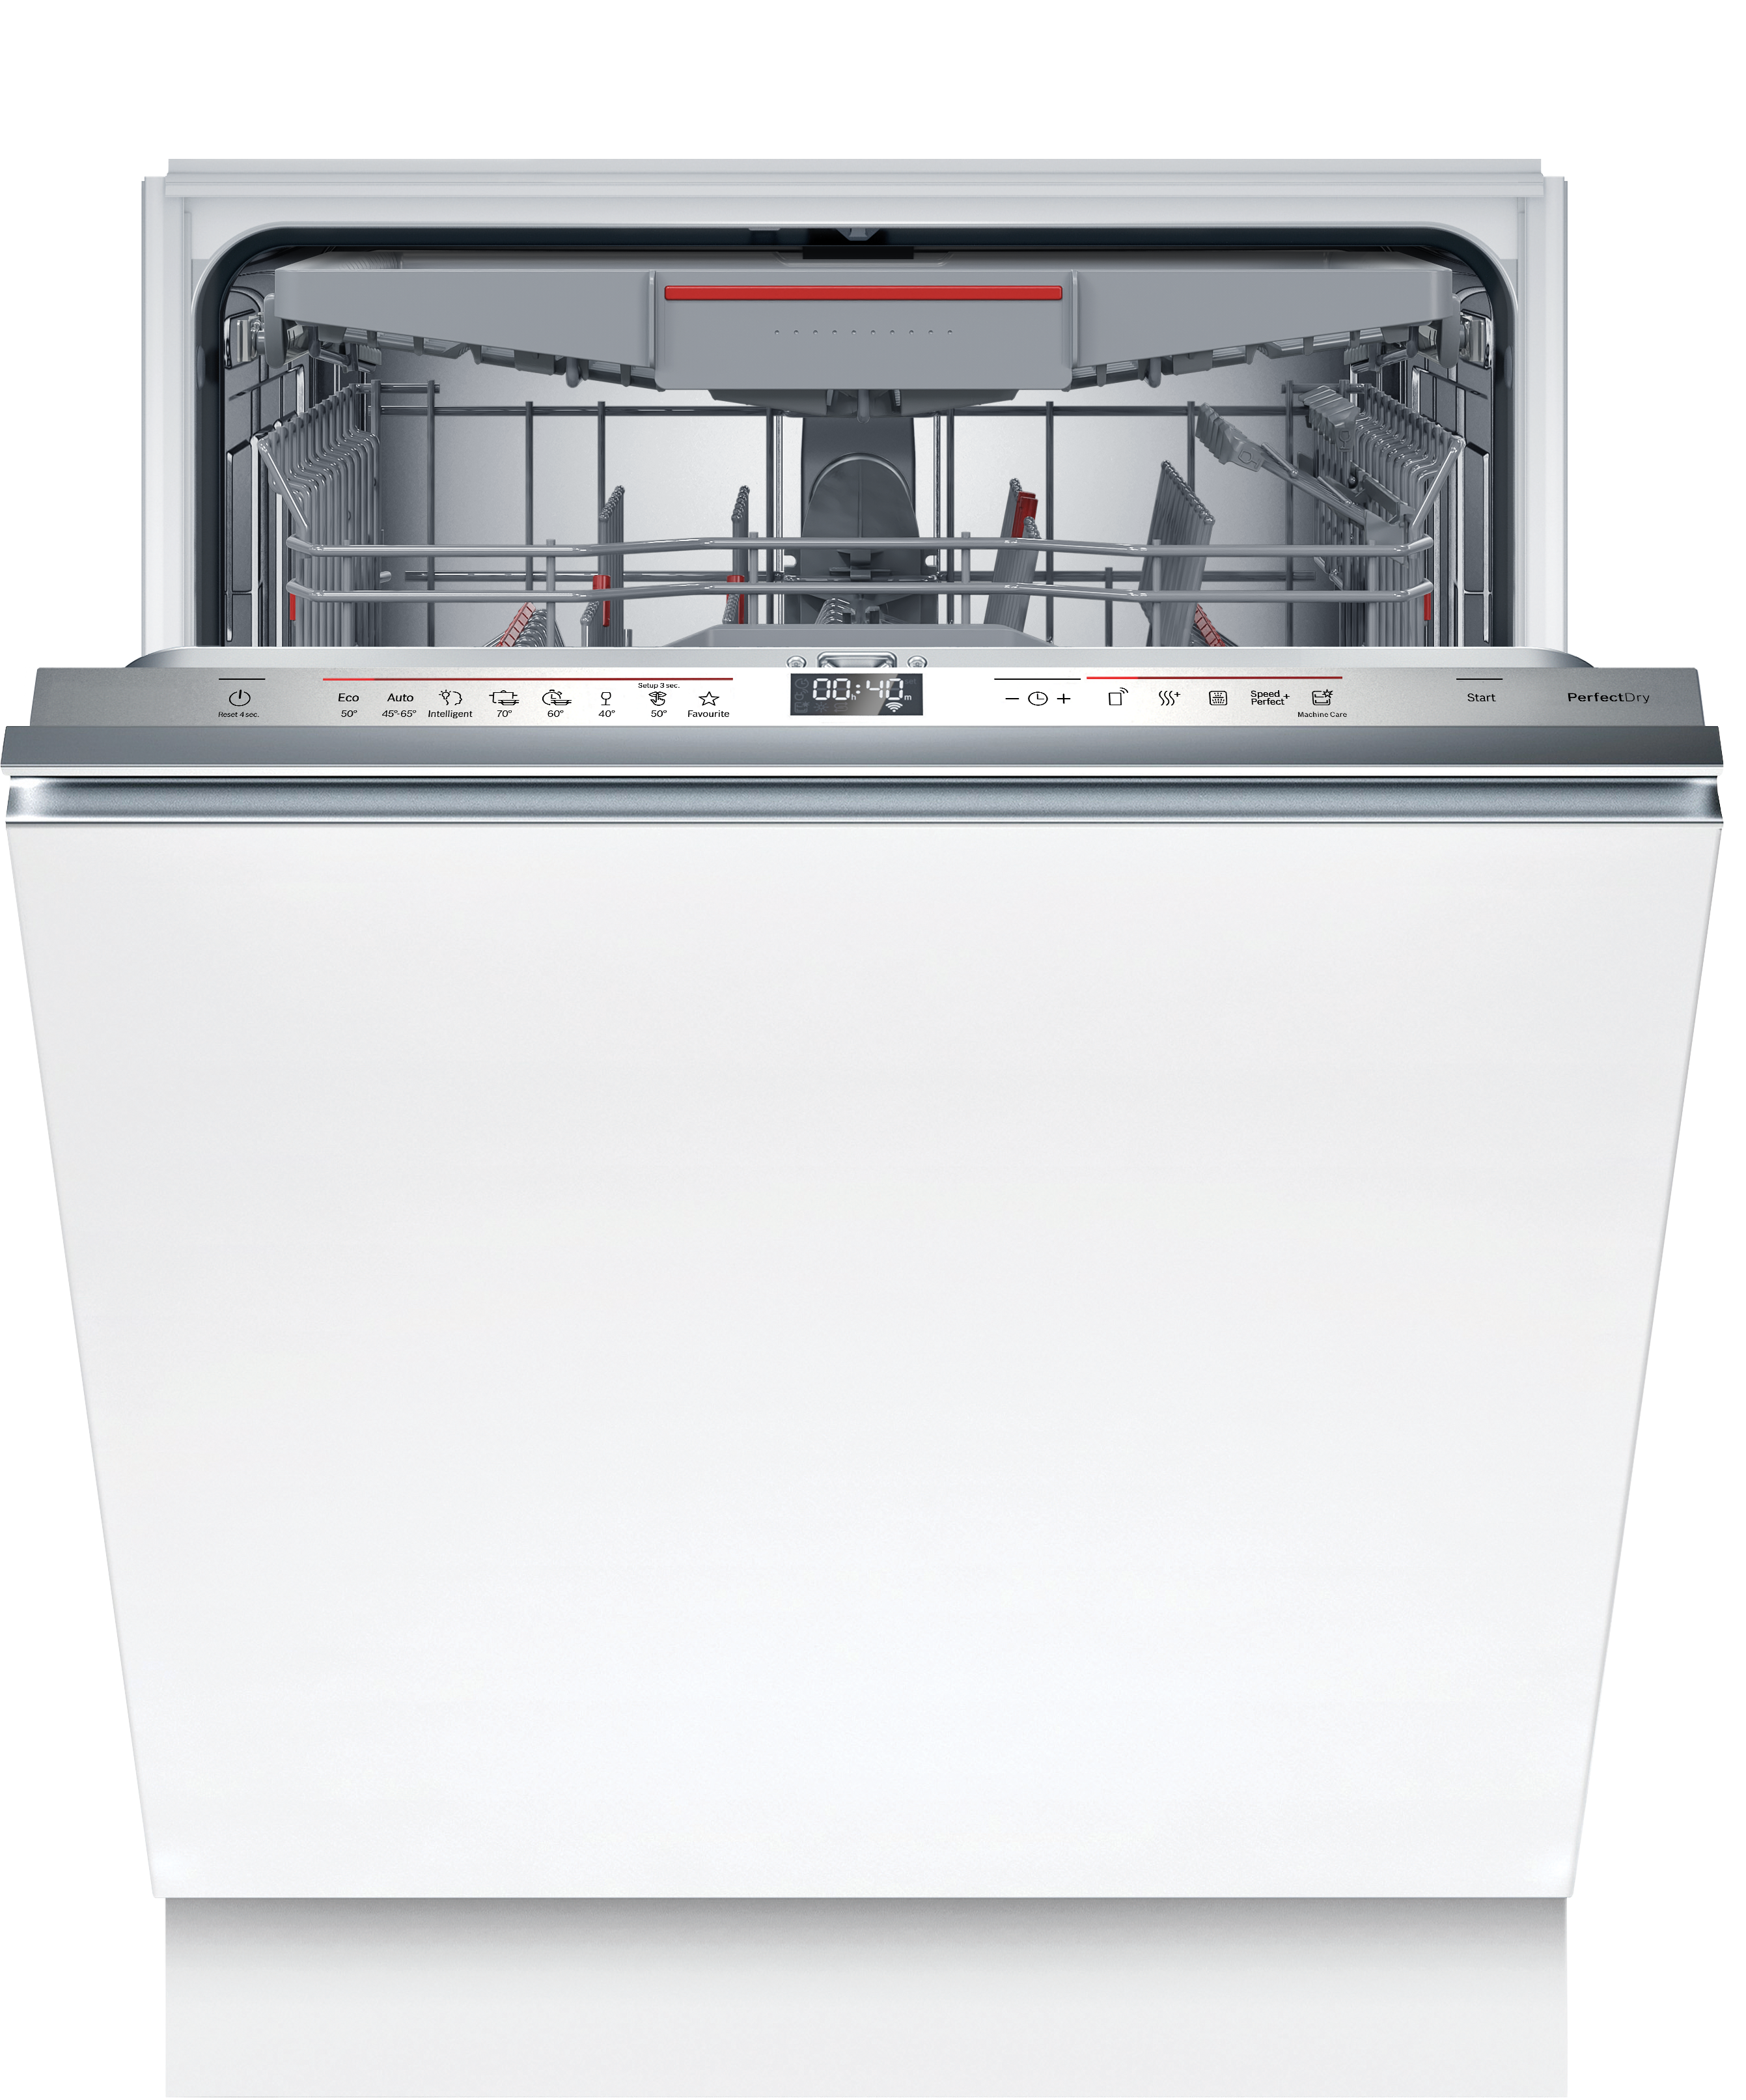 Series 6, fully-integrated dishwasher, 60 cm, Variable hinge for special installation situations, SMH6ZCX06E